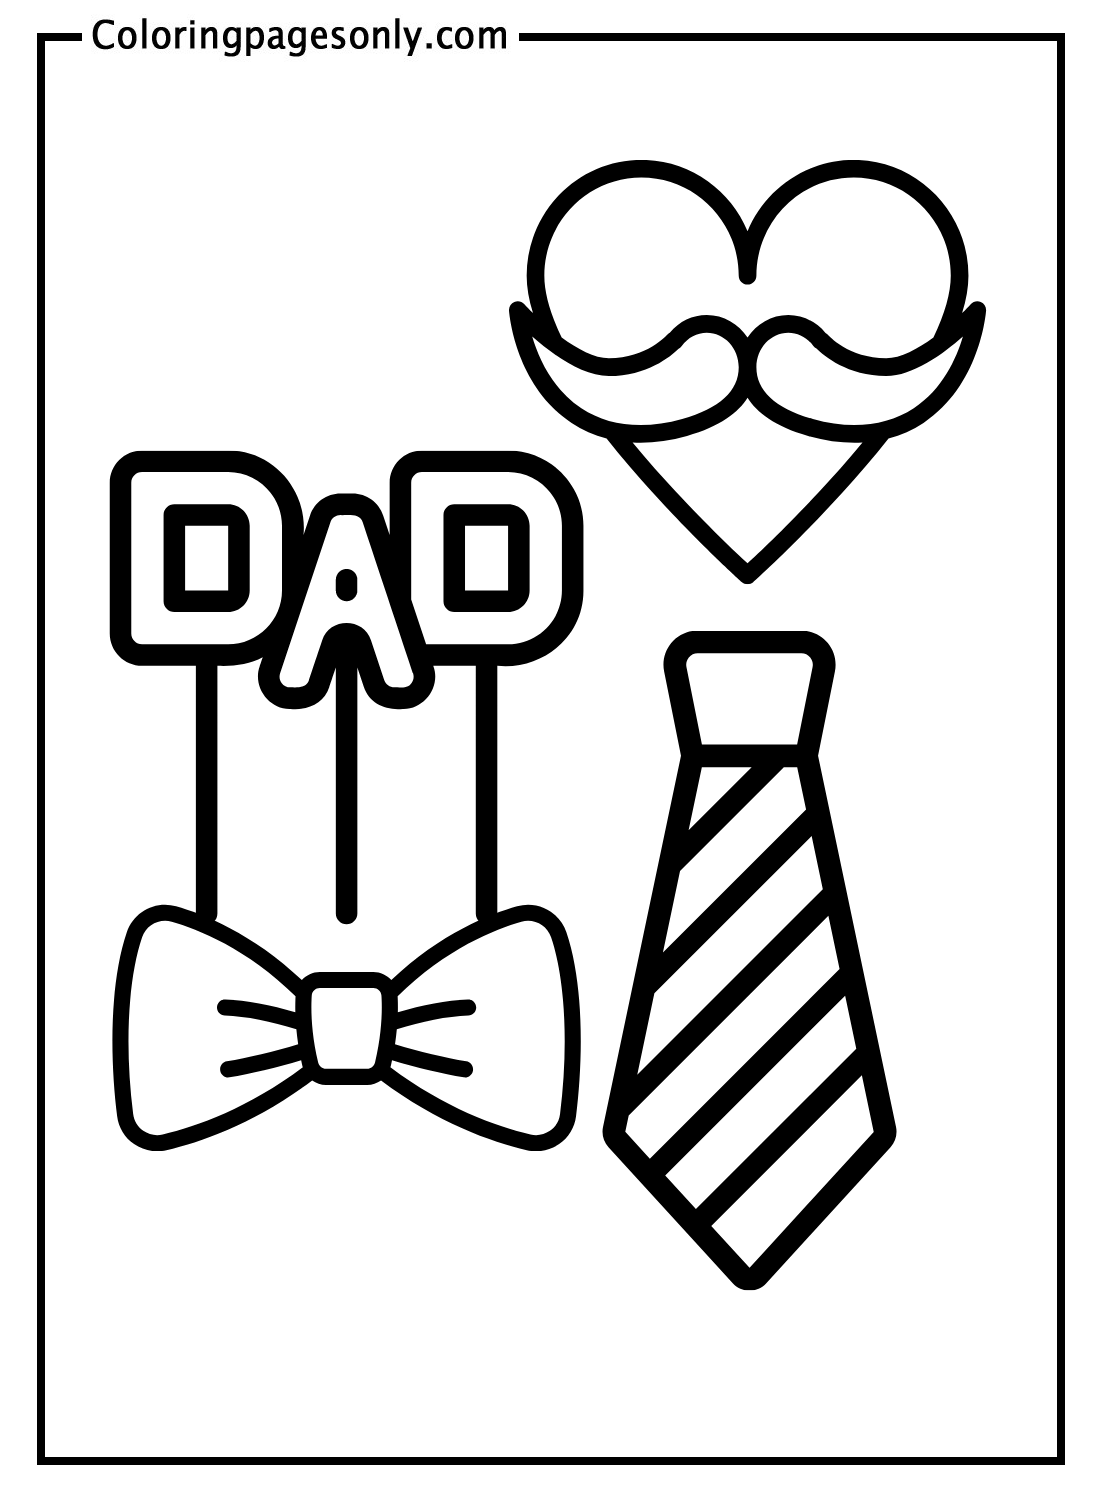 Father's Day For Children Coloring Pages